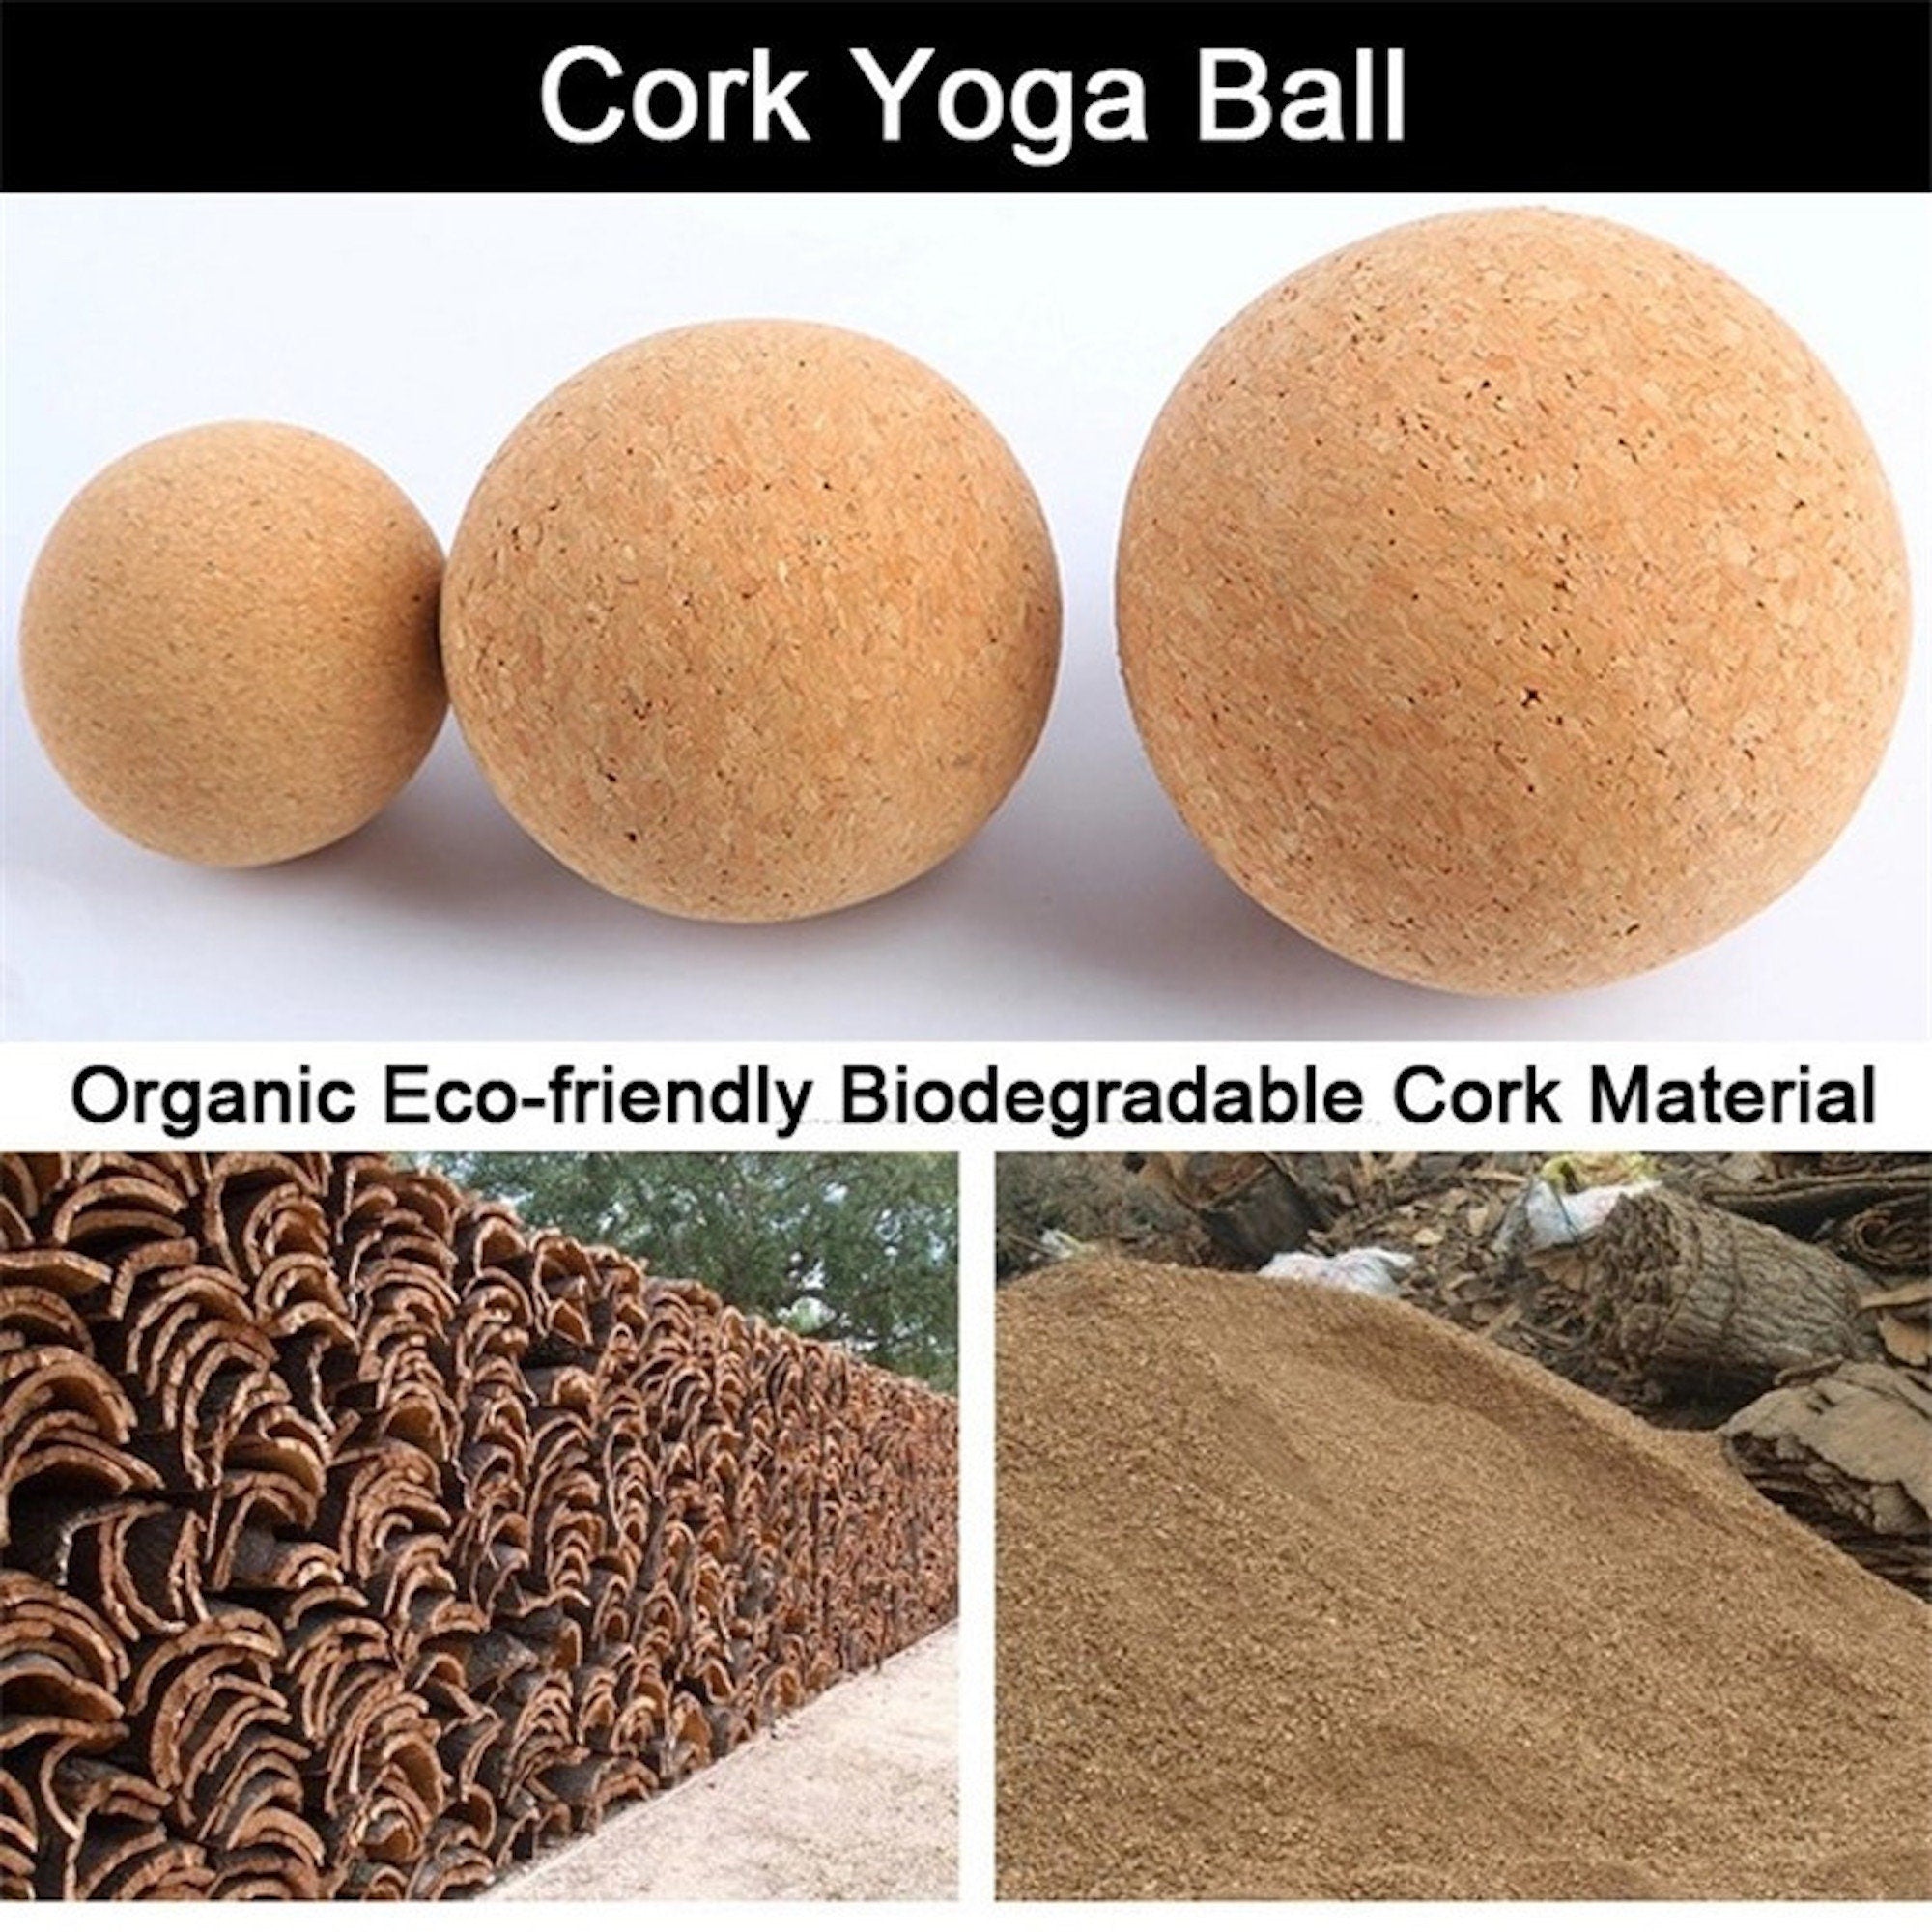 Cork Yoga Massage Ball Non Toxic Naturally Sourced From India With Cotton Canvas Carry Pouch Use For Muscle Relaxation Sport Injury Recovery  14.99 Indigo Paisley